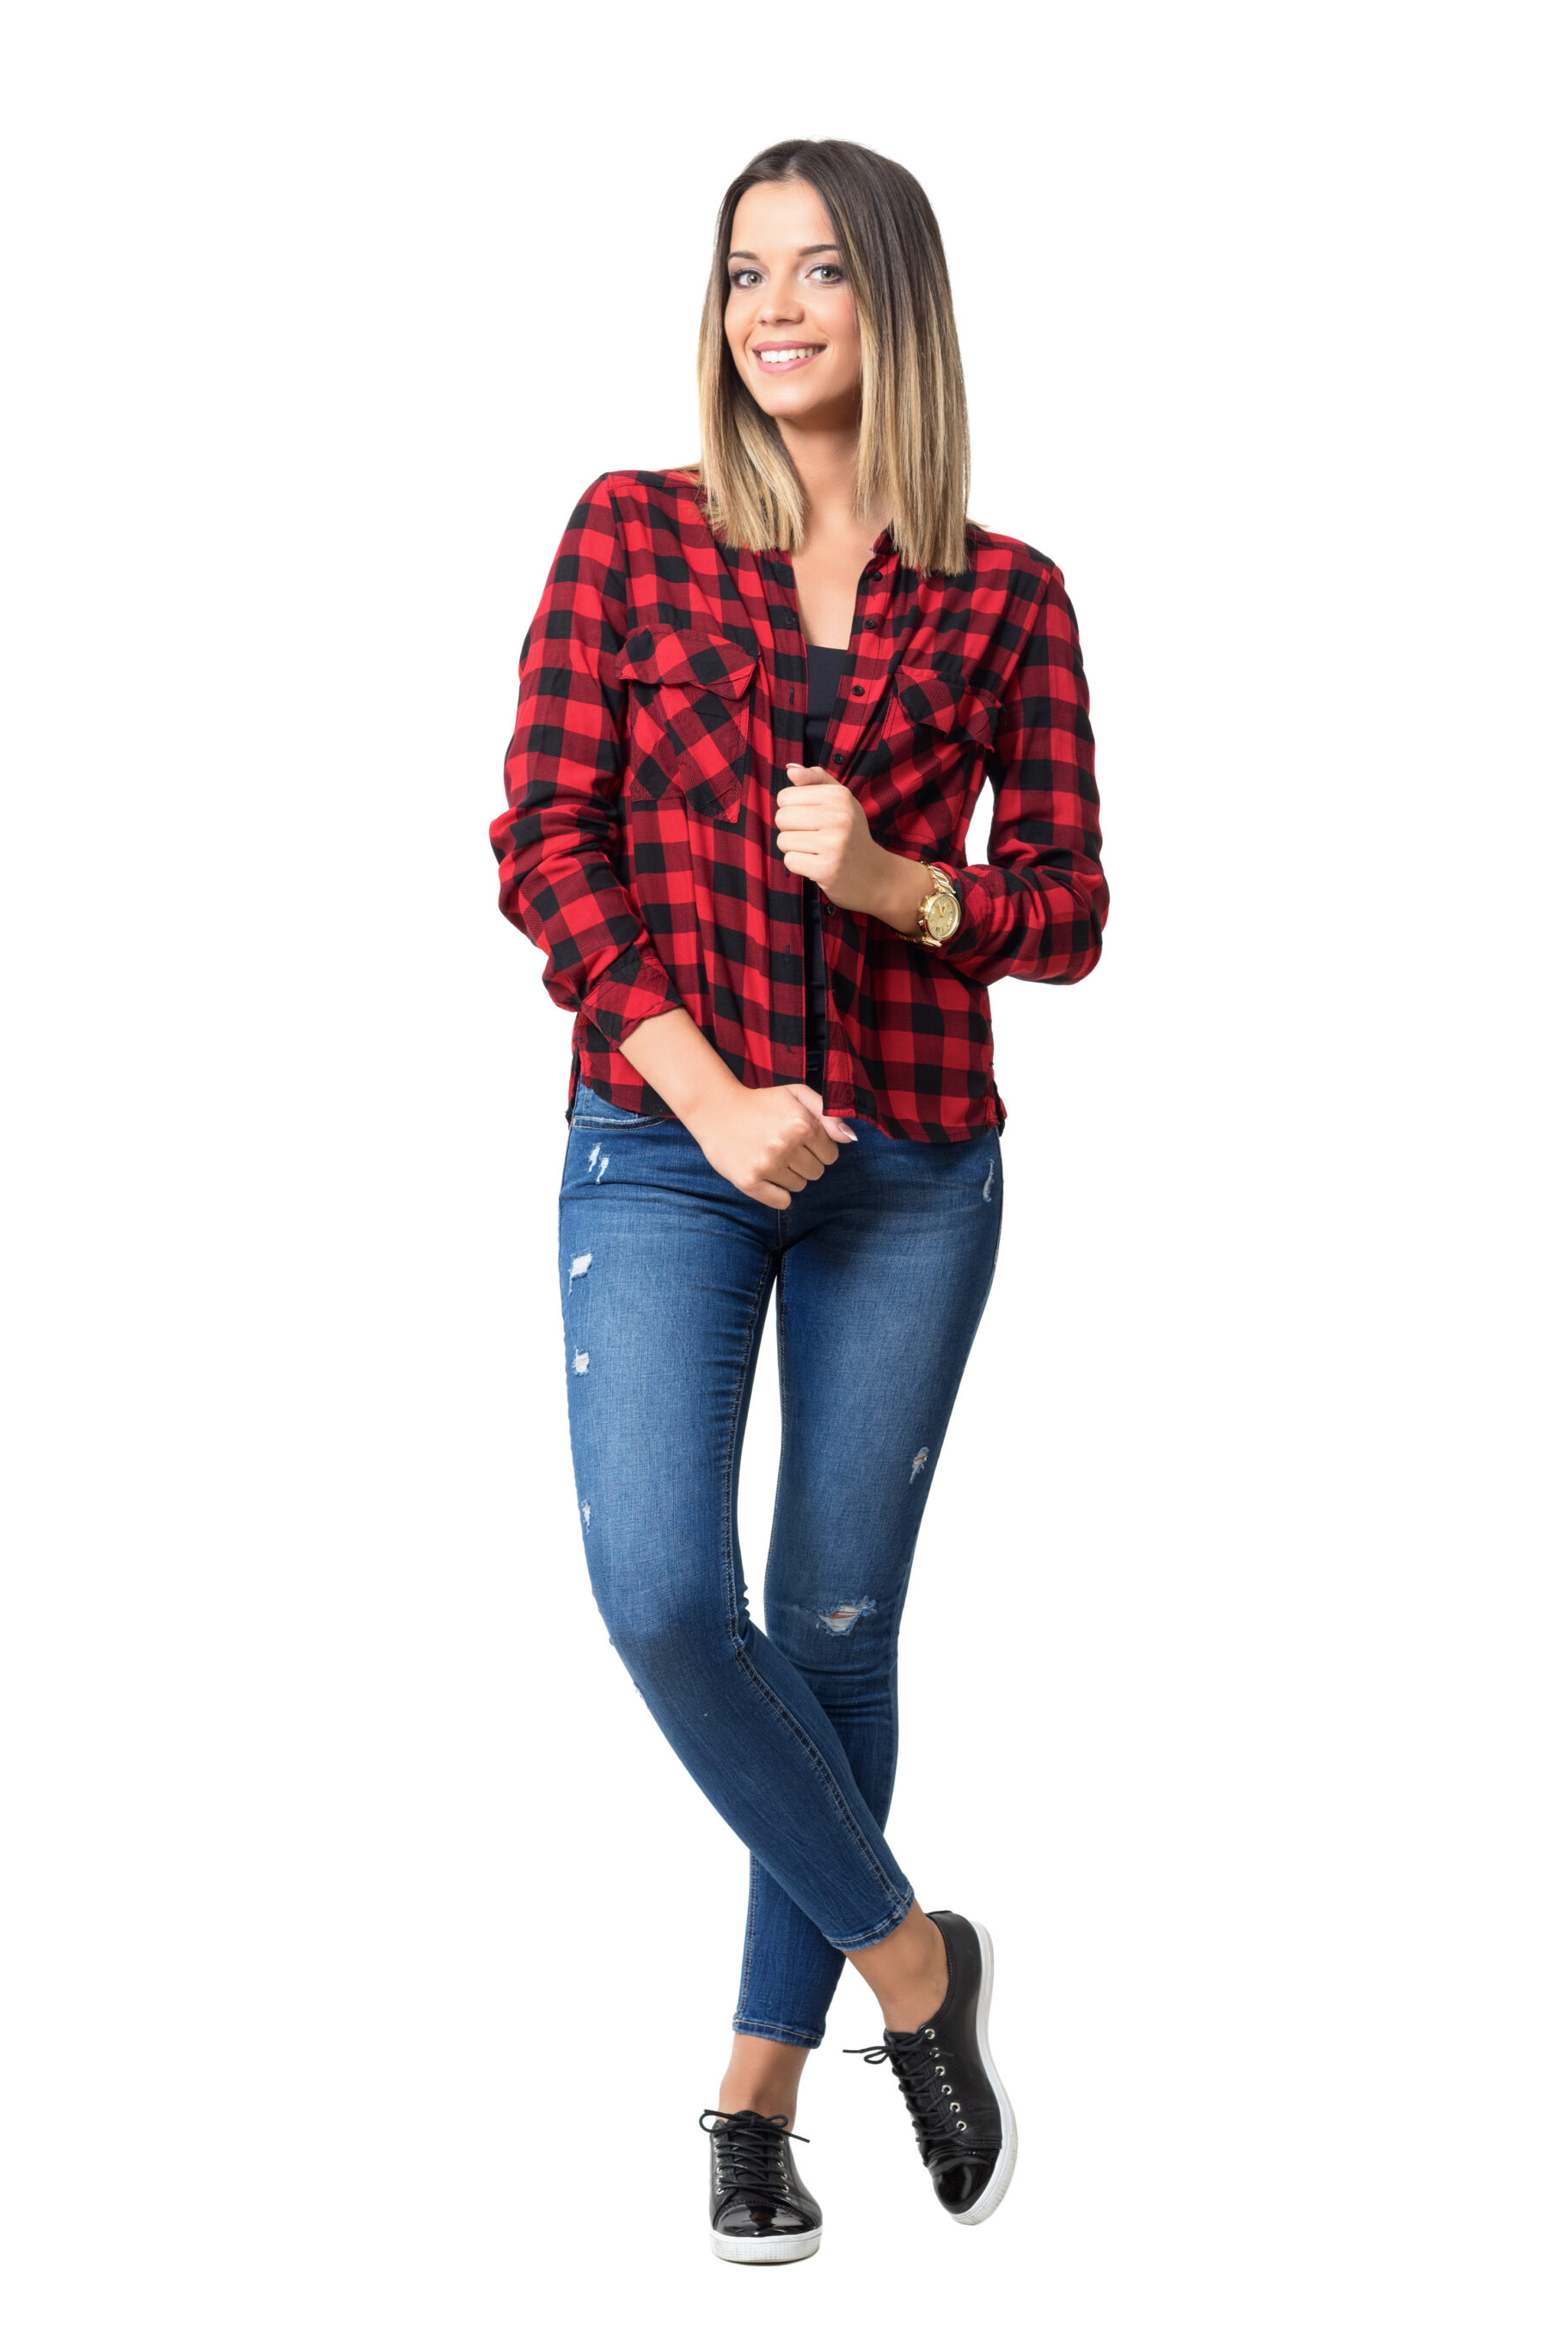 Red Plaid Shirt With Light Blue Jeans